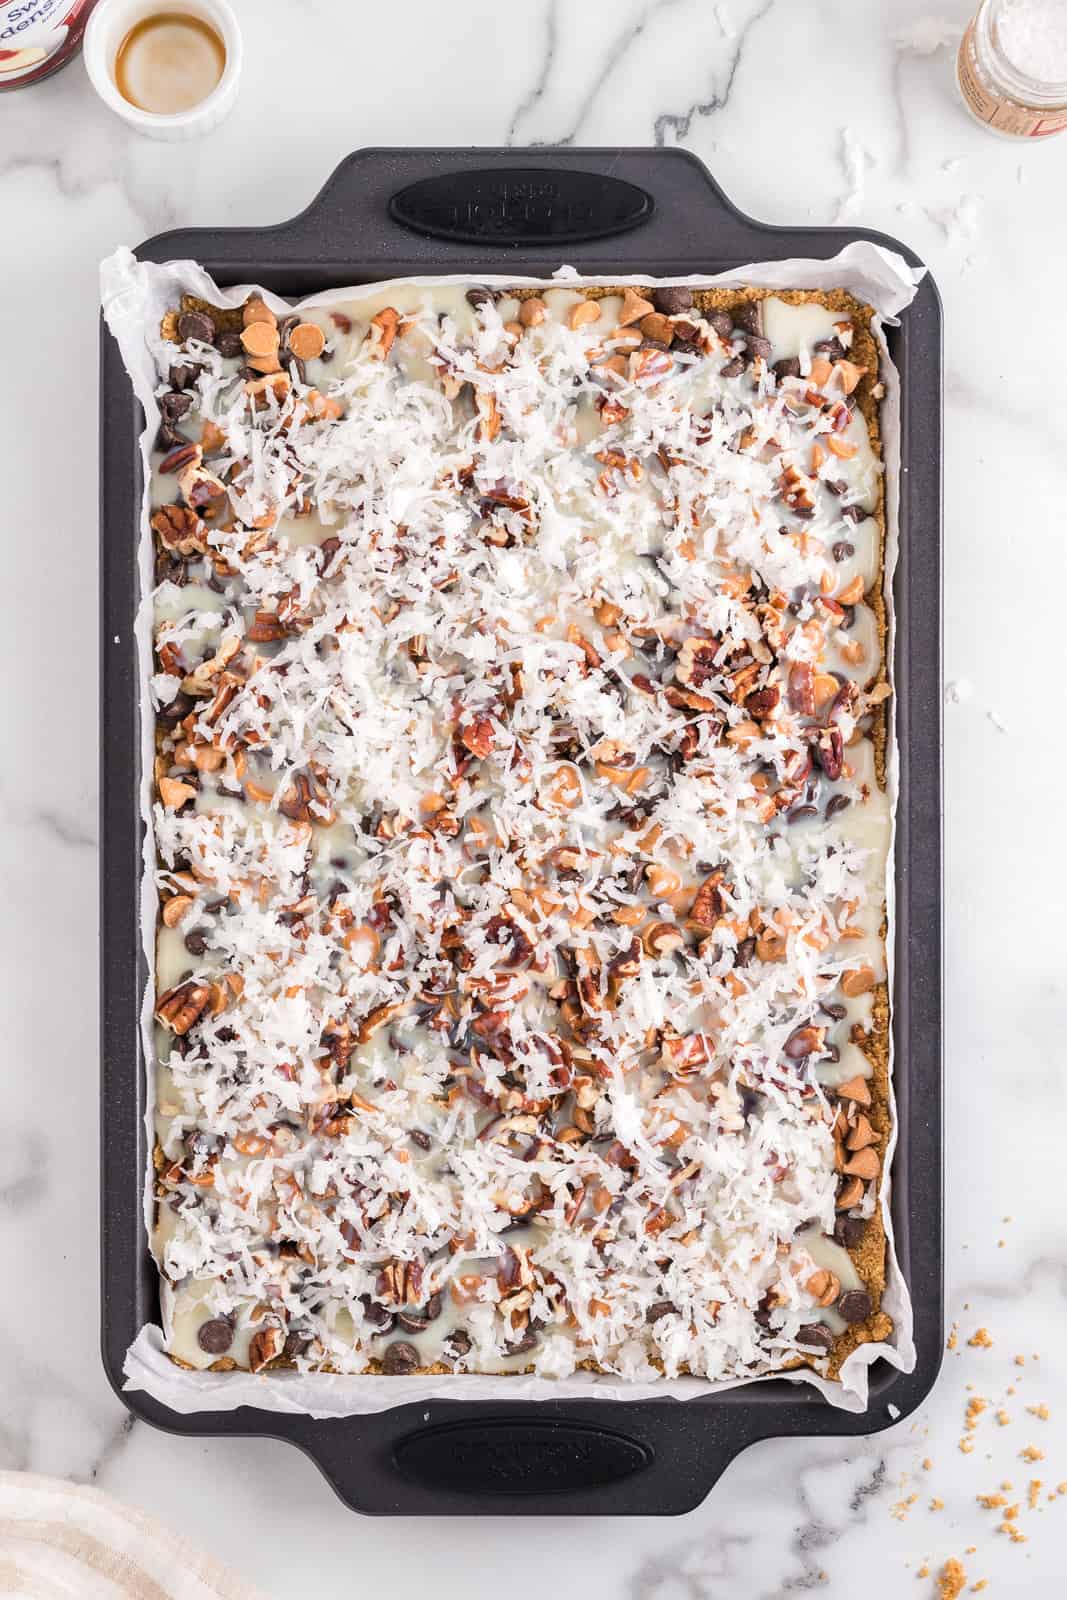 Baking chips, nuts, vanilla, condensed milk and shredded coconut on a crust.